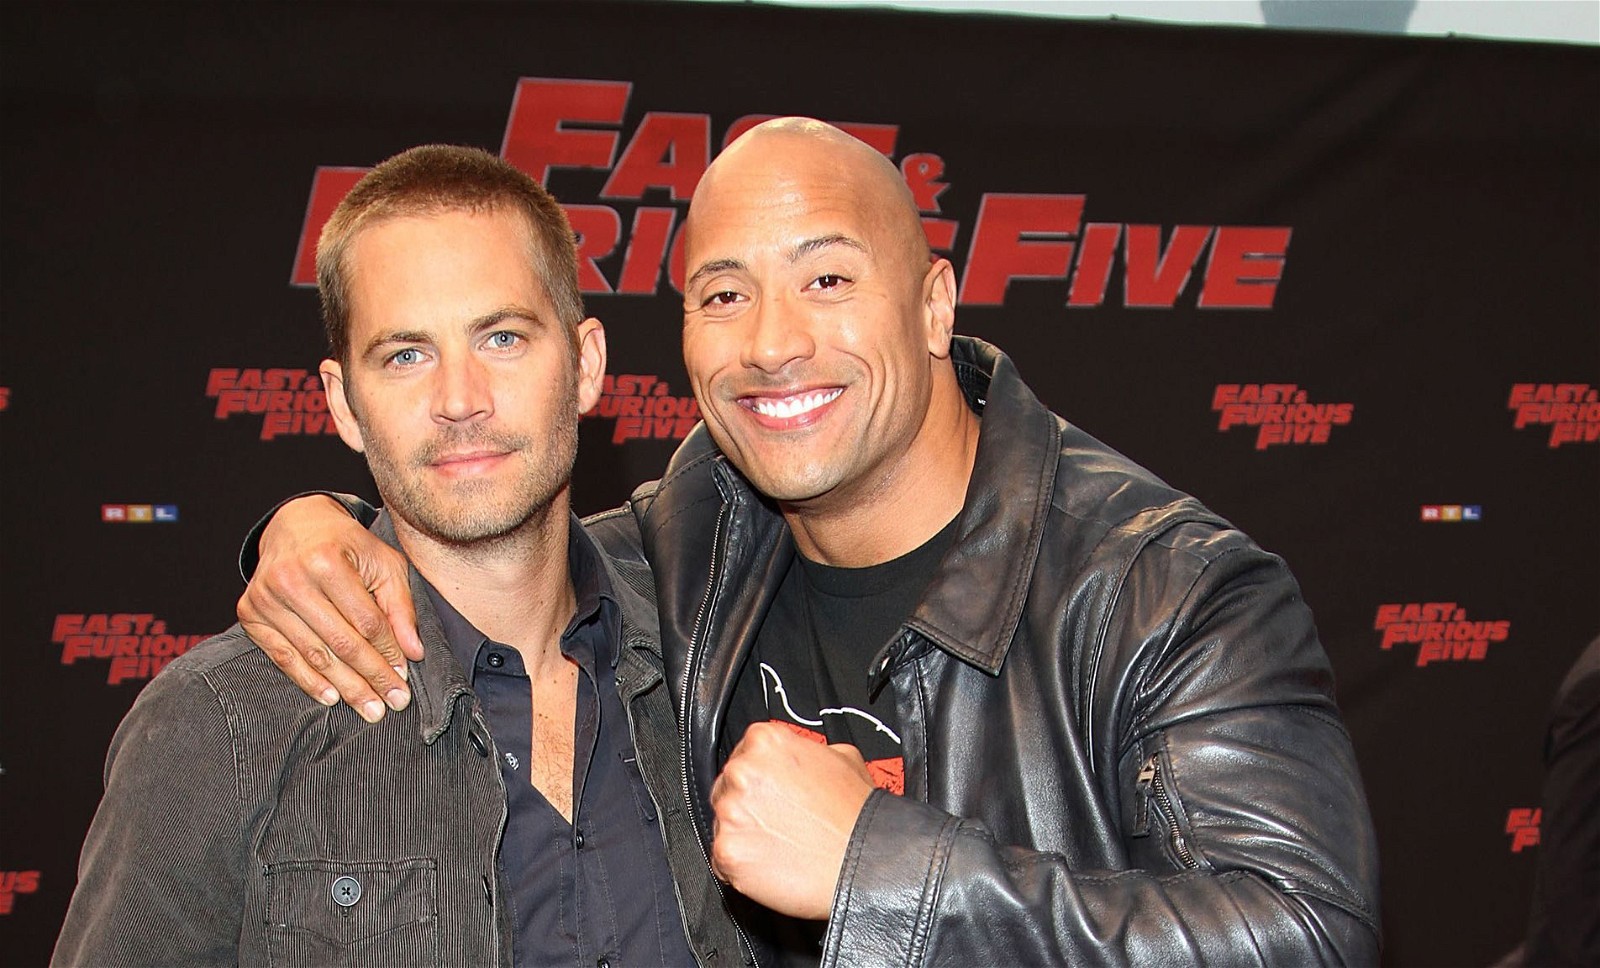 Johnson was close with his fast and Furious co-star Paul Walker